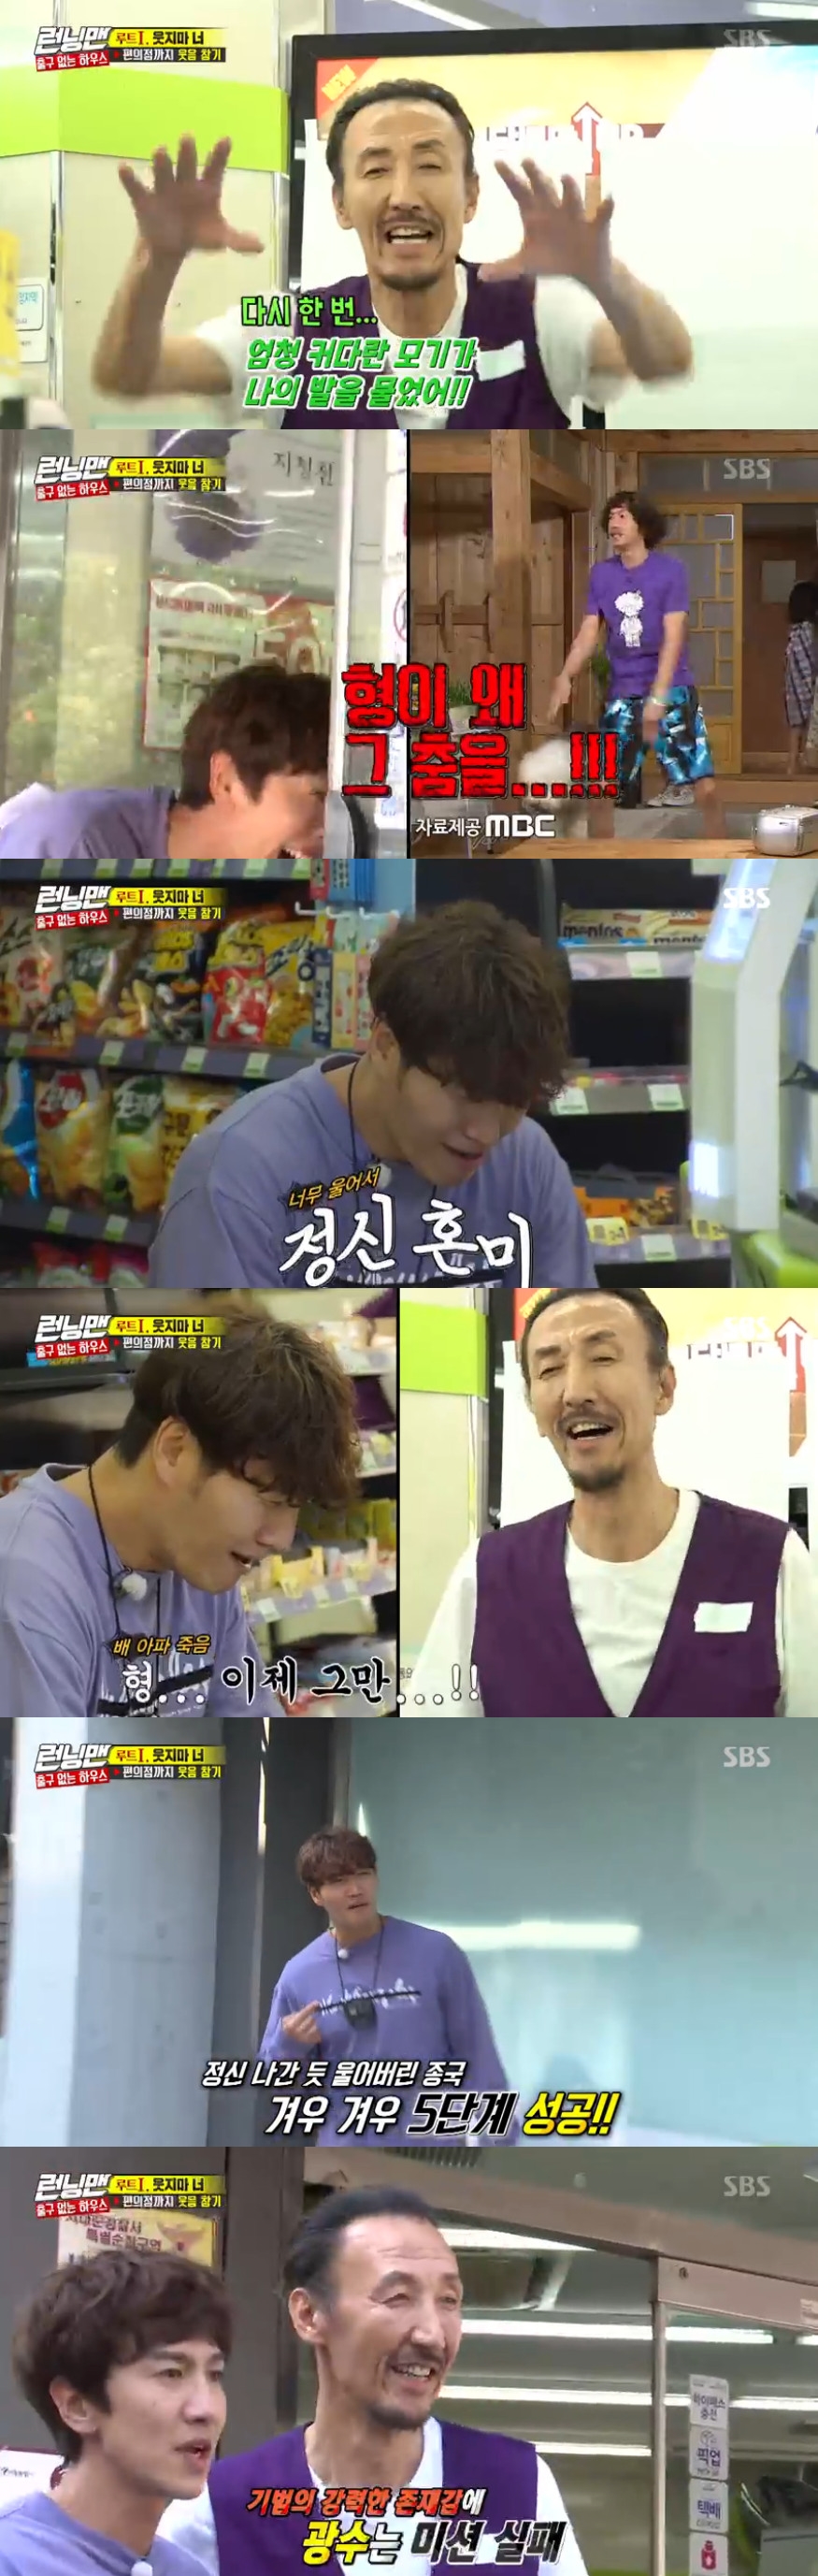 One more example from basketball player showed off his strong presence on SBS Running Man.One more example appeared on the house without the exit of SBS entertainment program Running Man broadcast on October 20th.On this day, Running Man members such as comedian Yoo Jae-suk, Yang Se-chan, Ji Suk-jin, singer Haha, Kim Jong-kook, actor Jeon So-min and Song Ji Hyo were Top Model on the 5th stage course prepared by the production team.The production team explained that if you succeed in performing all the missions given without laughing, you can enjoy special benefits.Many members, including Ji Suk-jin, failed to win benefits by laughing at the beginning.Among them, Kim Jong-kook and Lee Kwang-soo were the last runners-up and Top Model on the 5th stage laughing patience mission.Kim Jong-kook and Lee Kwang-soo, who succeeded in laughing at the students with nose hair, the person who made the character in the Aladdin, and the staff who made the shaved makeup, entered the Convenience store for the last mission, Buying things at the Convenience store.There was a laughing end king in the Convenience store.Basketball star One more example played a part-time job in charge of calculating the Convenience store.Lee Kwang-soo, who forced himself to put up with laughter until stage 4, immediately laughed as soon as he saw one more example face.Kim Jong-kook, on the other hand, entered the Convenience store with a smile.One more example took on the role of a high school student and tried to laugh Kim Jong-kook by parodying the acting of the Convenience store owner, Lee Kwang-soos song and dance in the drama.No.One more example apologized to the owners rant that high school students still can not calculate like this, and a big mosquito bit me, he said.Kim Jong-kook also asked, Is it funny though?Still, Kim Jong-kook was no good: One more example was strong to Kim Jong-kook, who didnt laugh to the end despite all the effort.When the crew gave the benefit of the mission success, Kim Jong-kook said, I am tearful. I can stand it well. I cried. I cried.I actually fell from a student, Lee Kwang-soo recalled, and I endured it to the end, but as soon as I opened the Convenience store door (it fell).It is the first time that One more example has appeared in Running Man since the age notice.One more example presented a laughing bomb to members of Running Man and viewers with a single five minutes appearance.hwang hye-jin